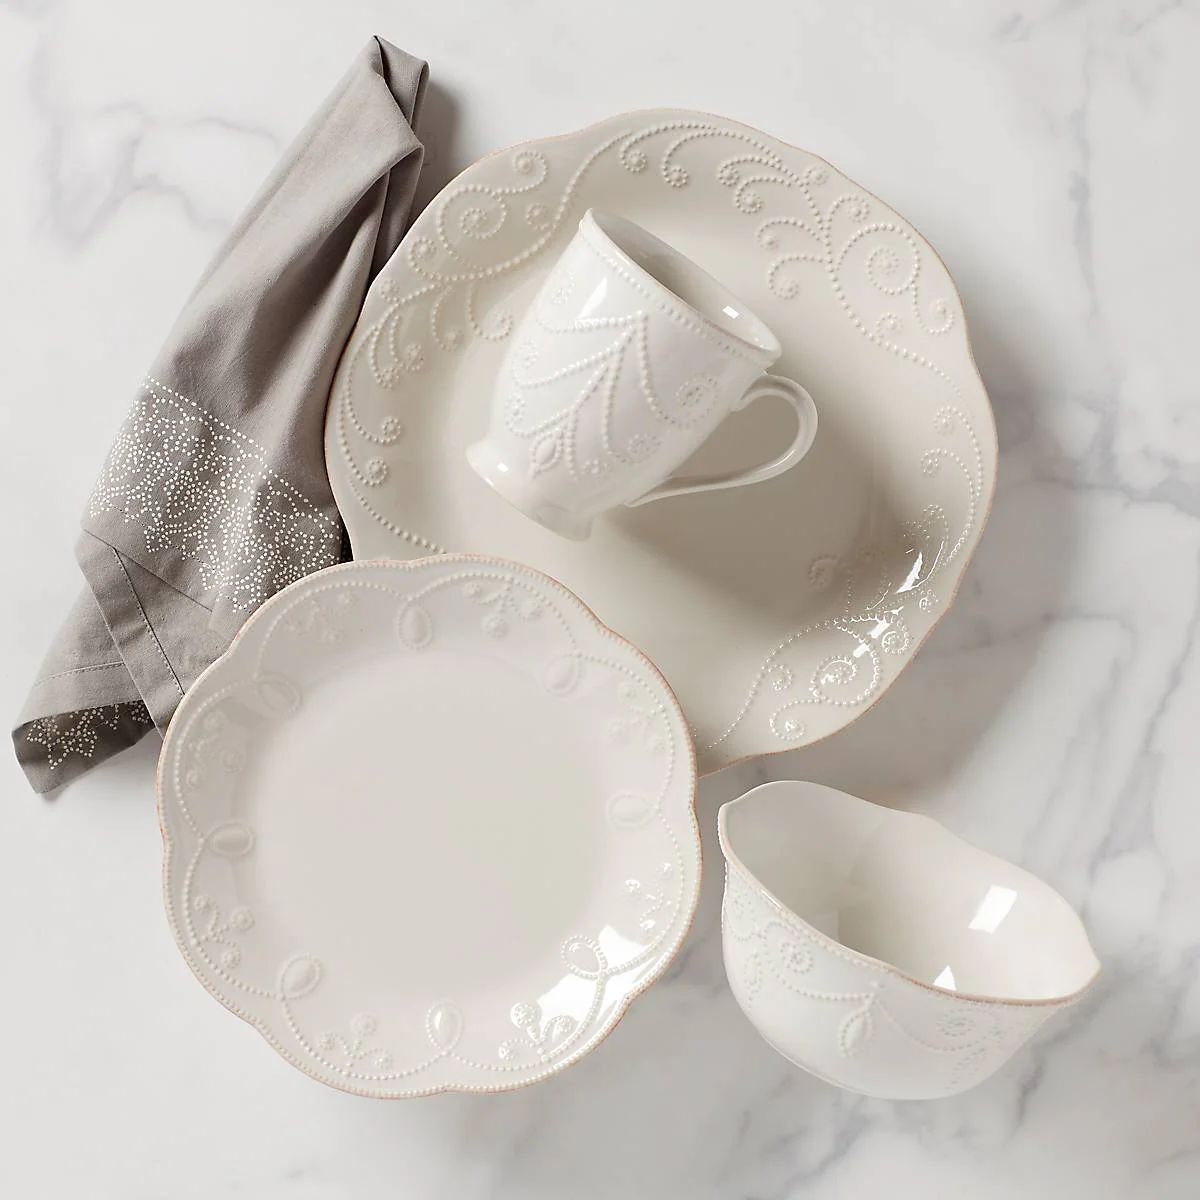 French Perle 4-Piece Place Setting | Lenox